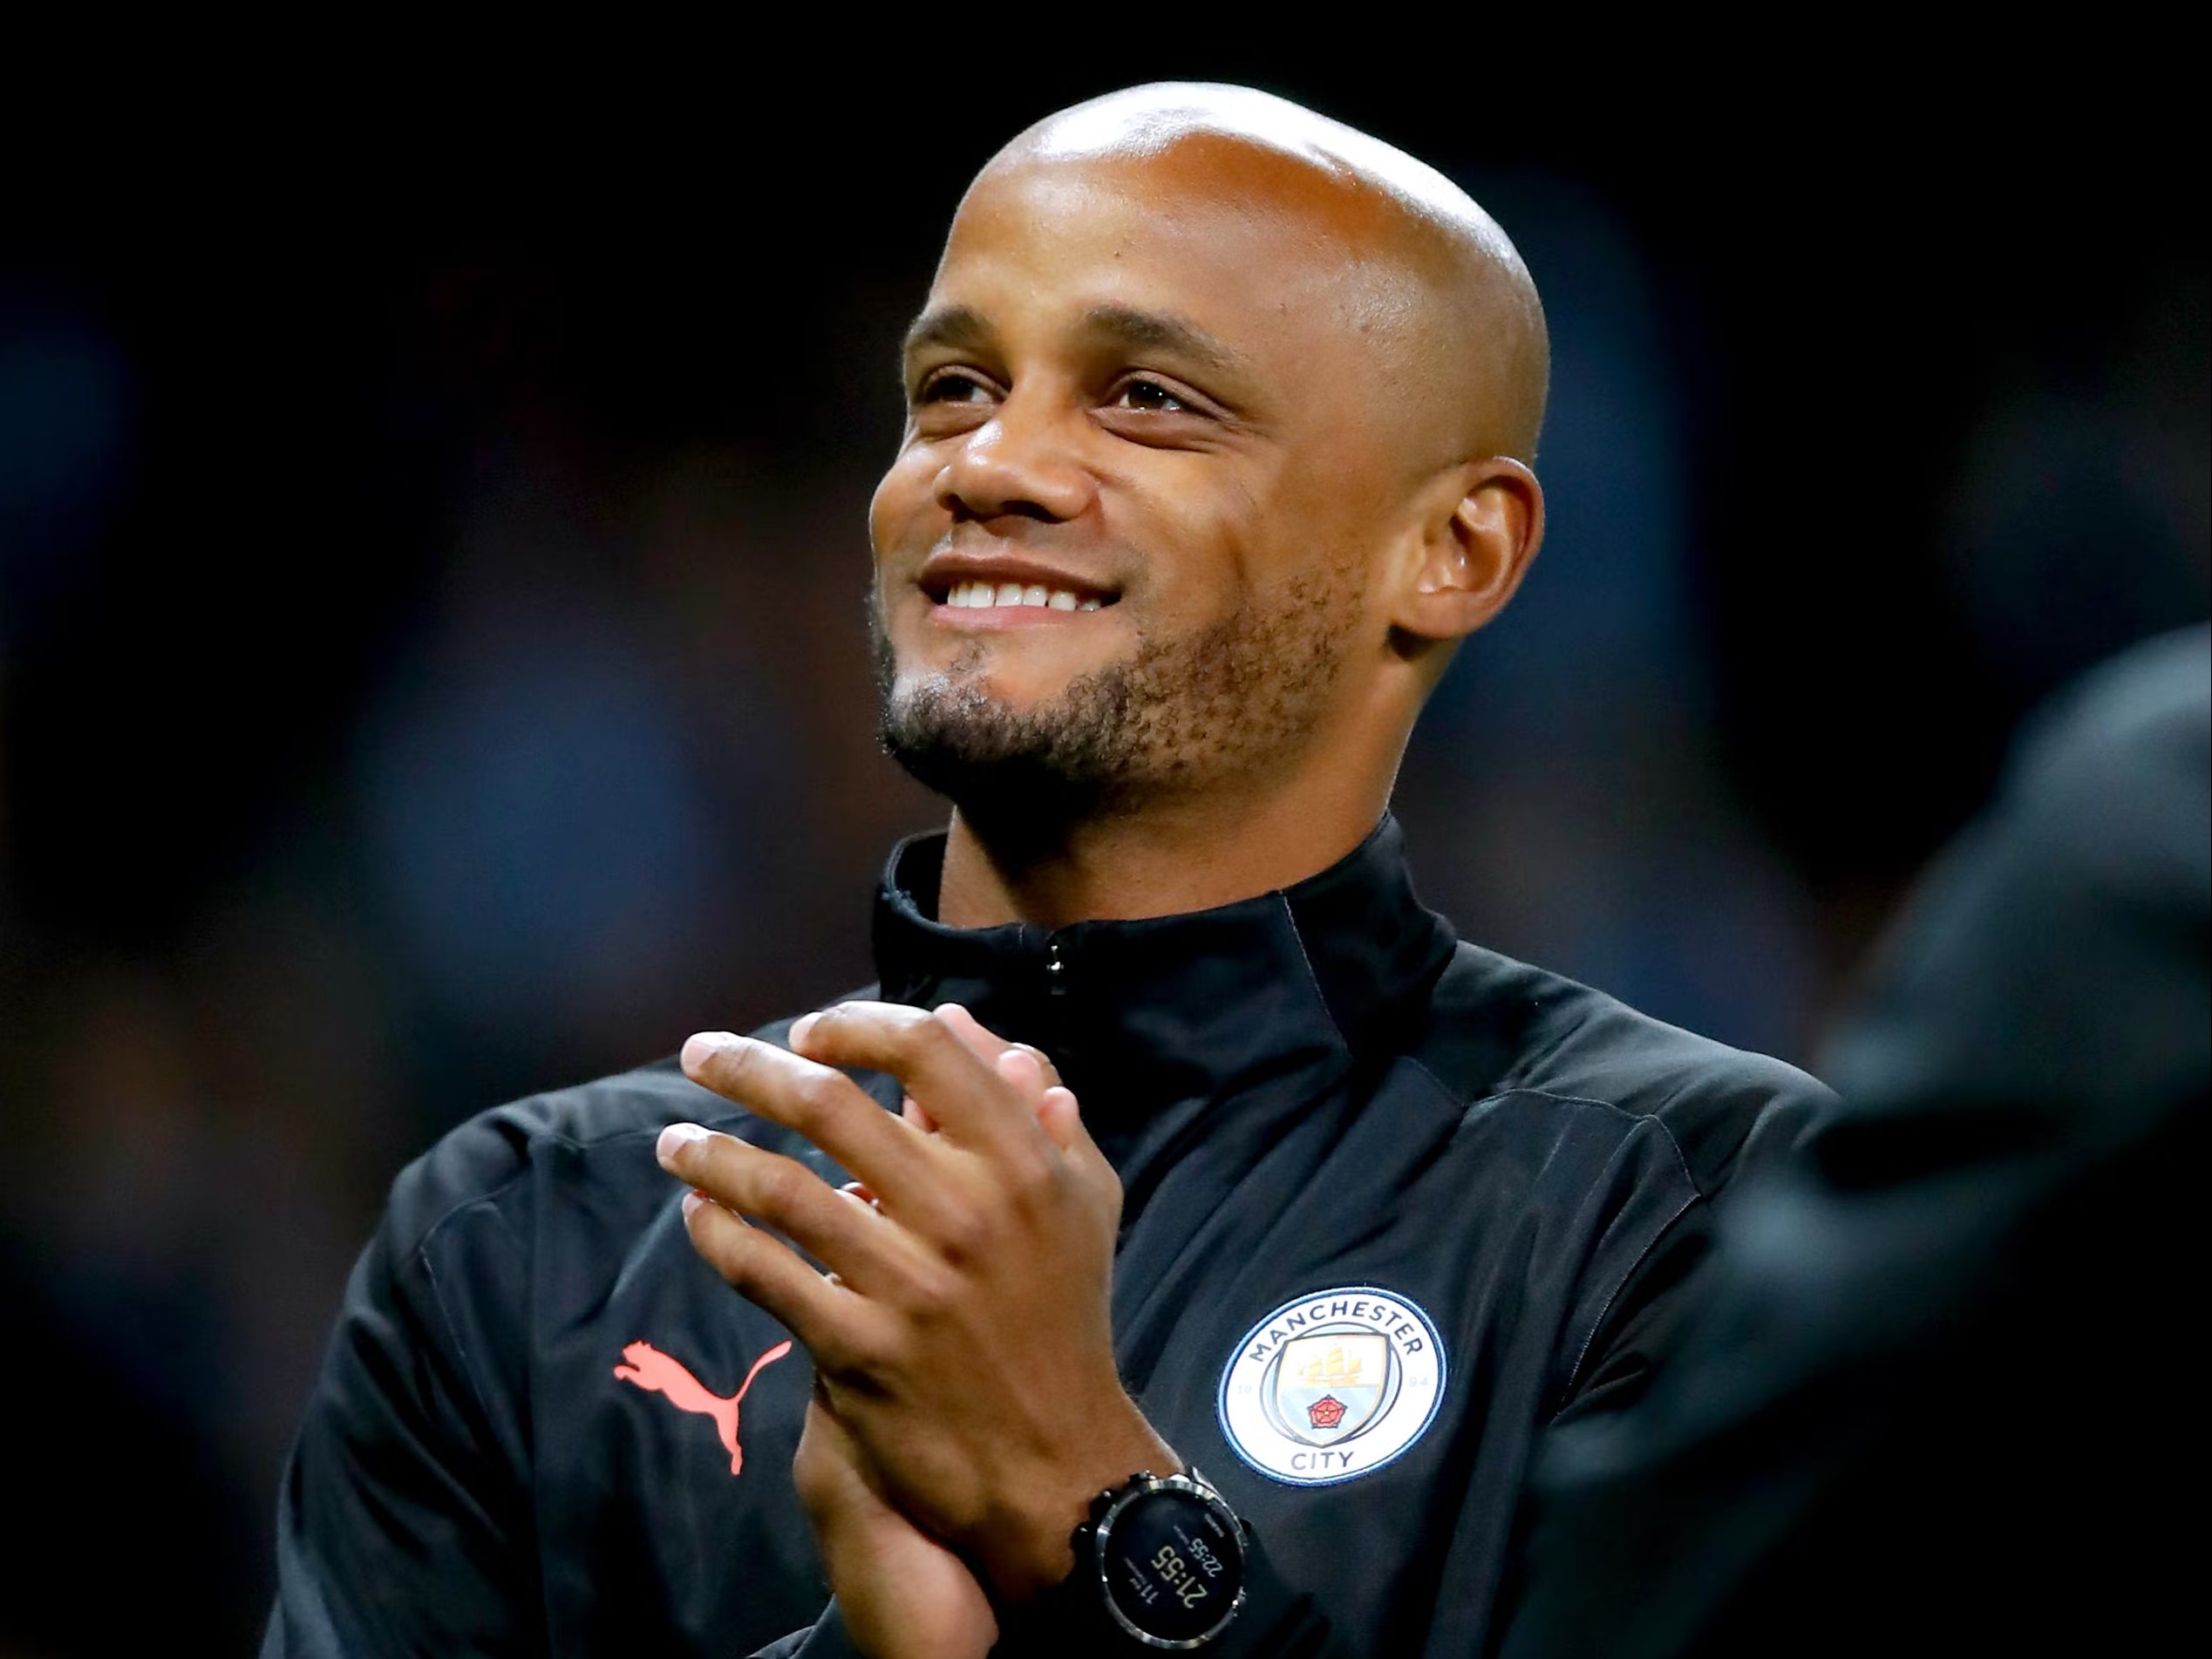 Vincent Kompany faces a tough task to steer Burnley back to the Premier League